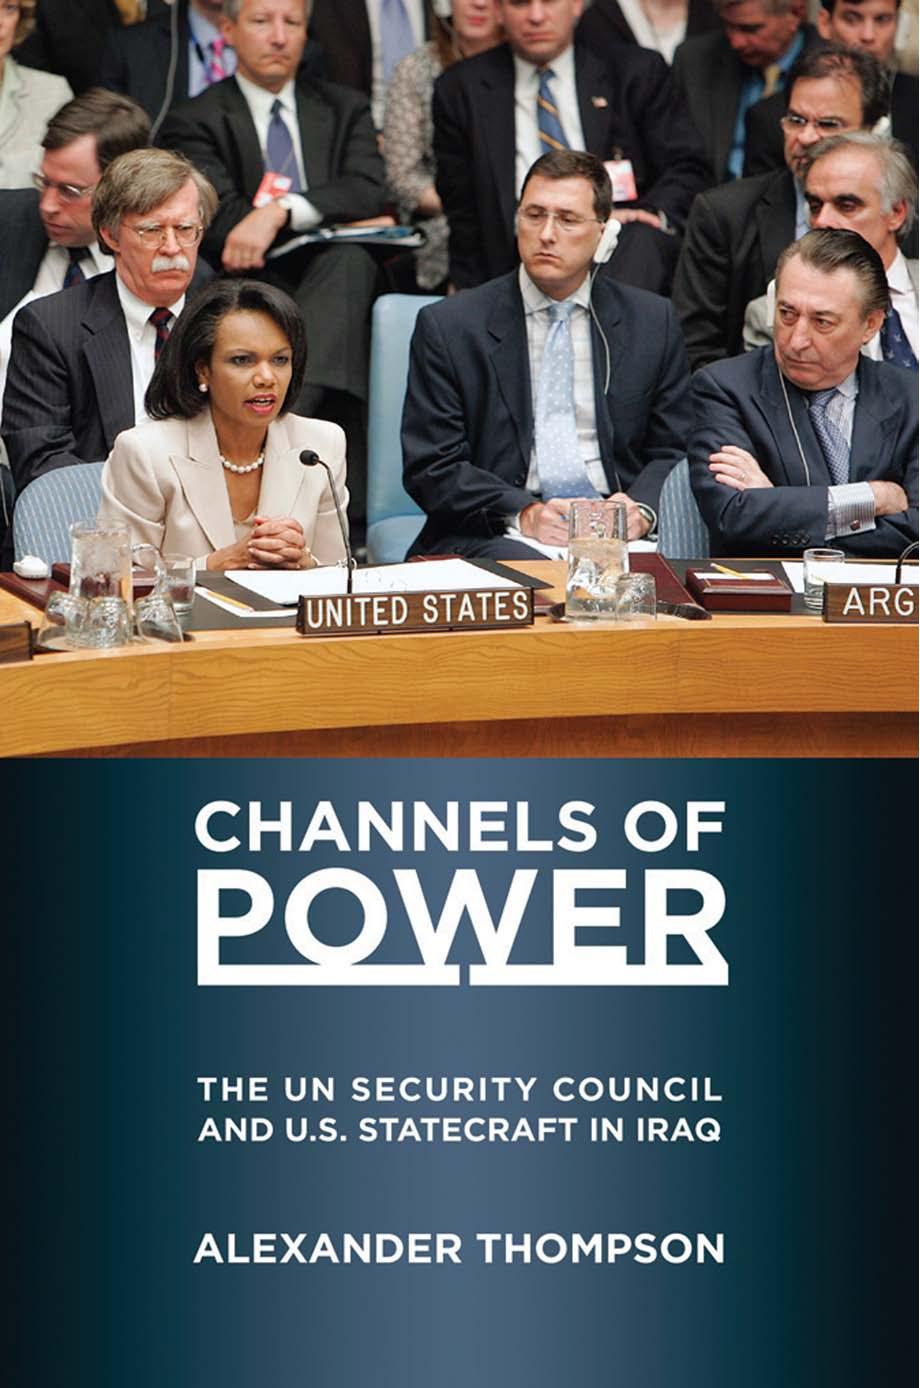 Channels of Power: The UN Security Council and U.S. Statecraft in Iraq by by Alexander Thompson